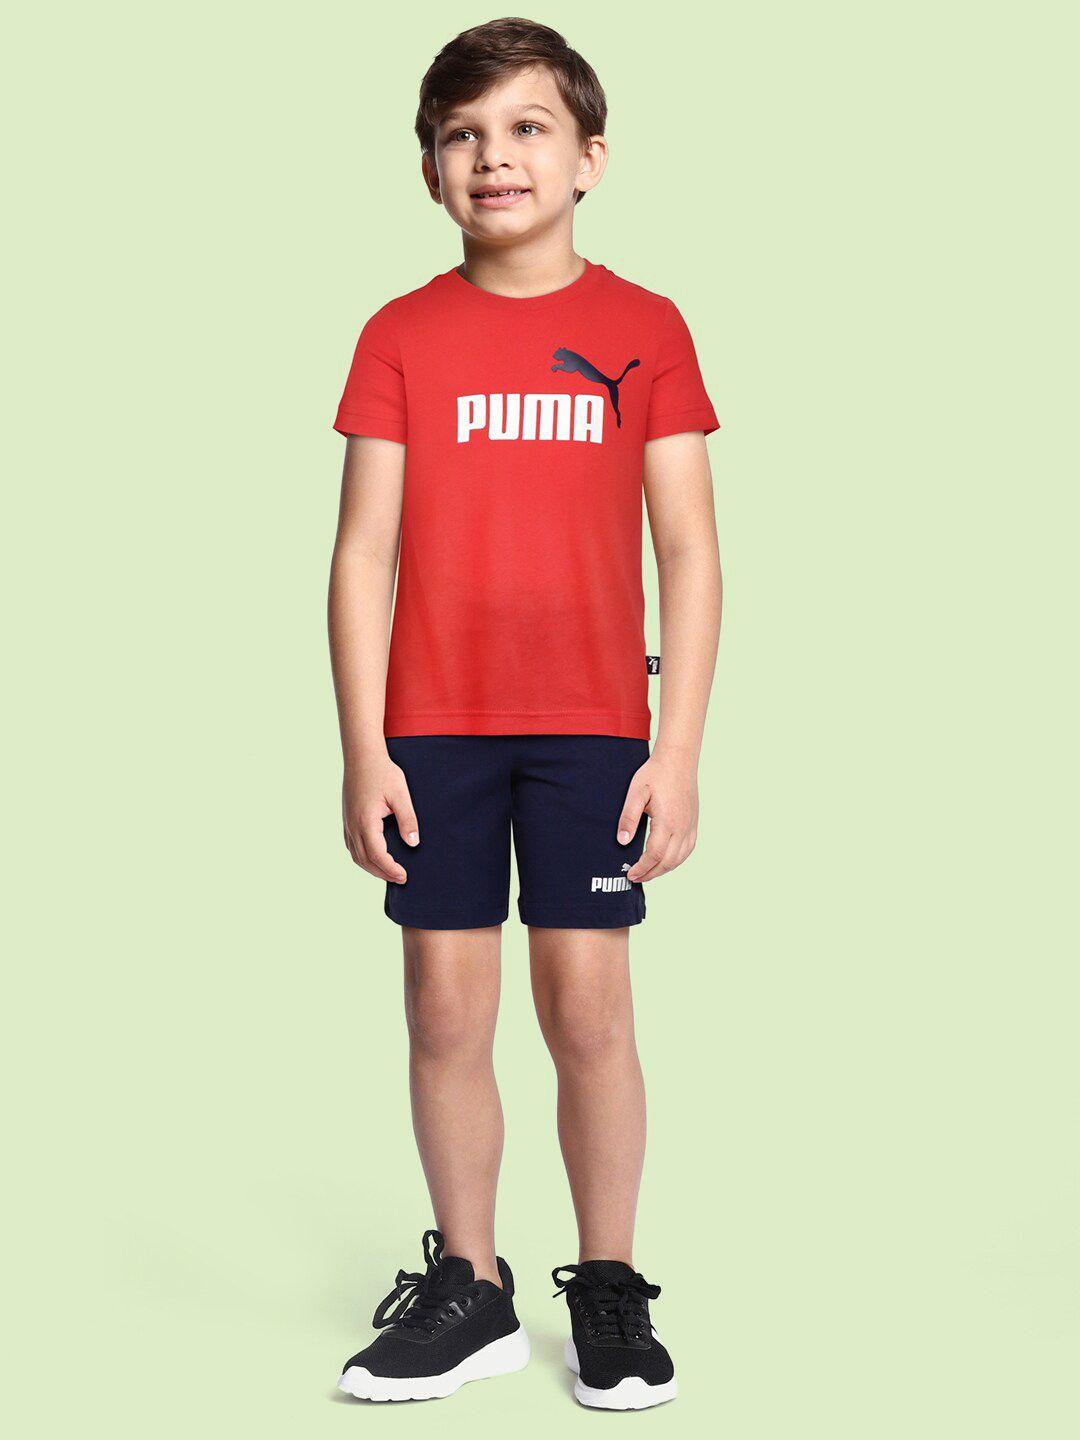 puma-boys-red-&-navy-blue-brand-logo-print-knitted-jersey-youth-t-shirt-with-shorts